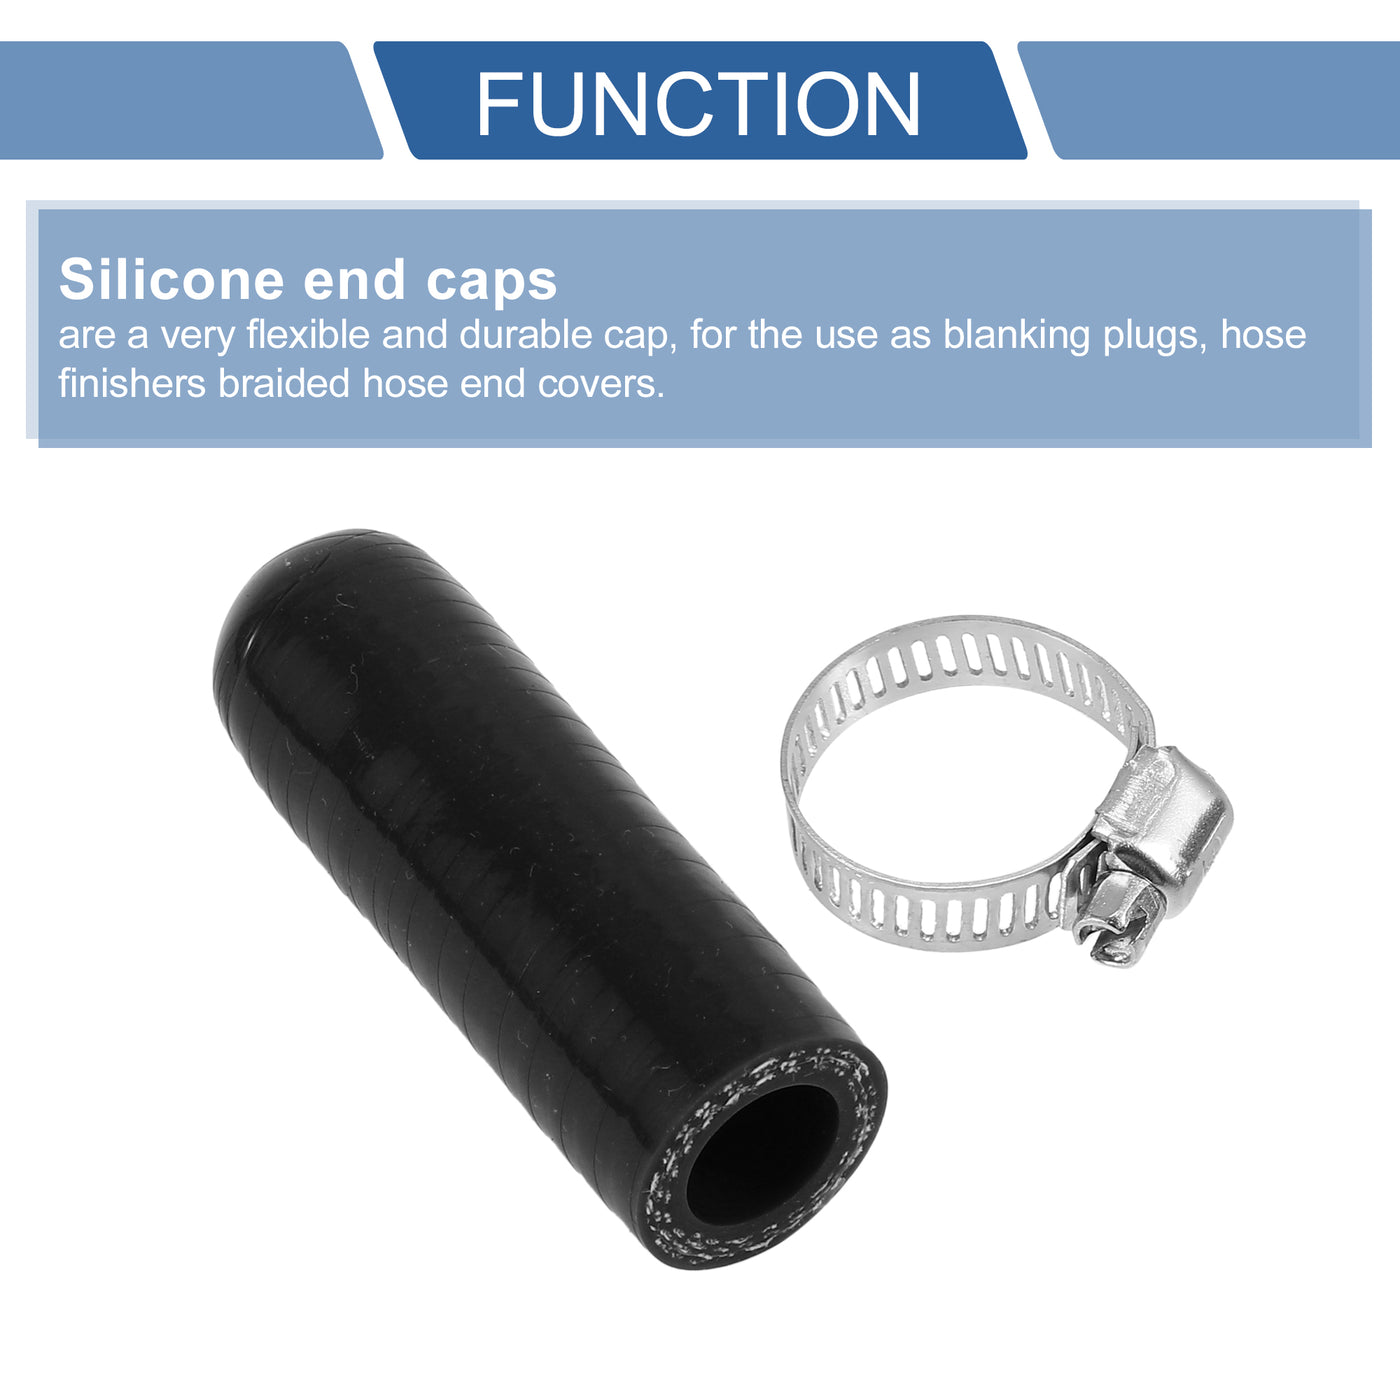 X AUTOHAUX 1 Pcs 60mm Length 14mm/0.55" ID Black Car Silicone Rubber Hose End Cap with Clamp Silicone Reinforced Blanking Cap for Bypass Tube Universal